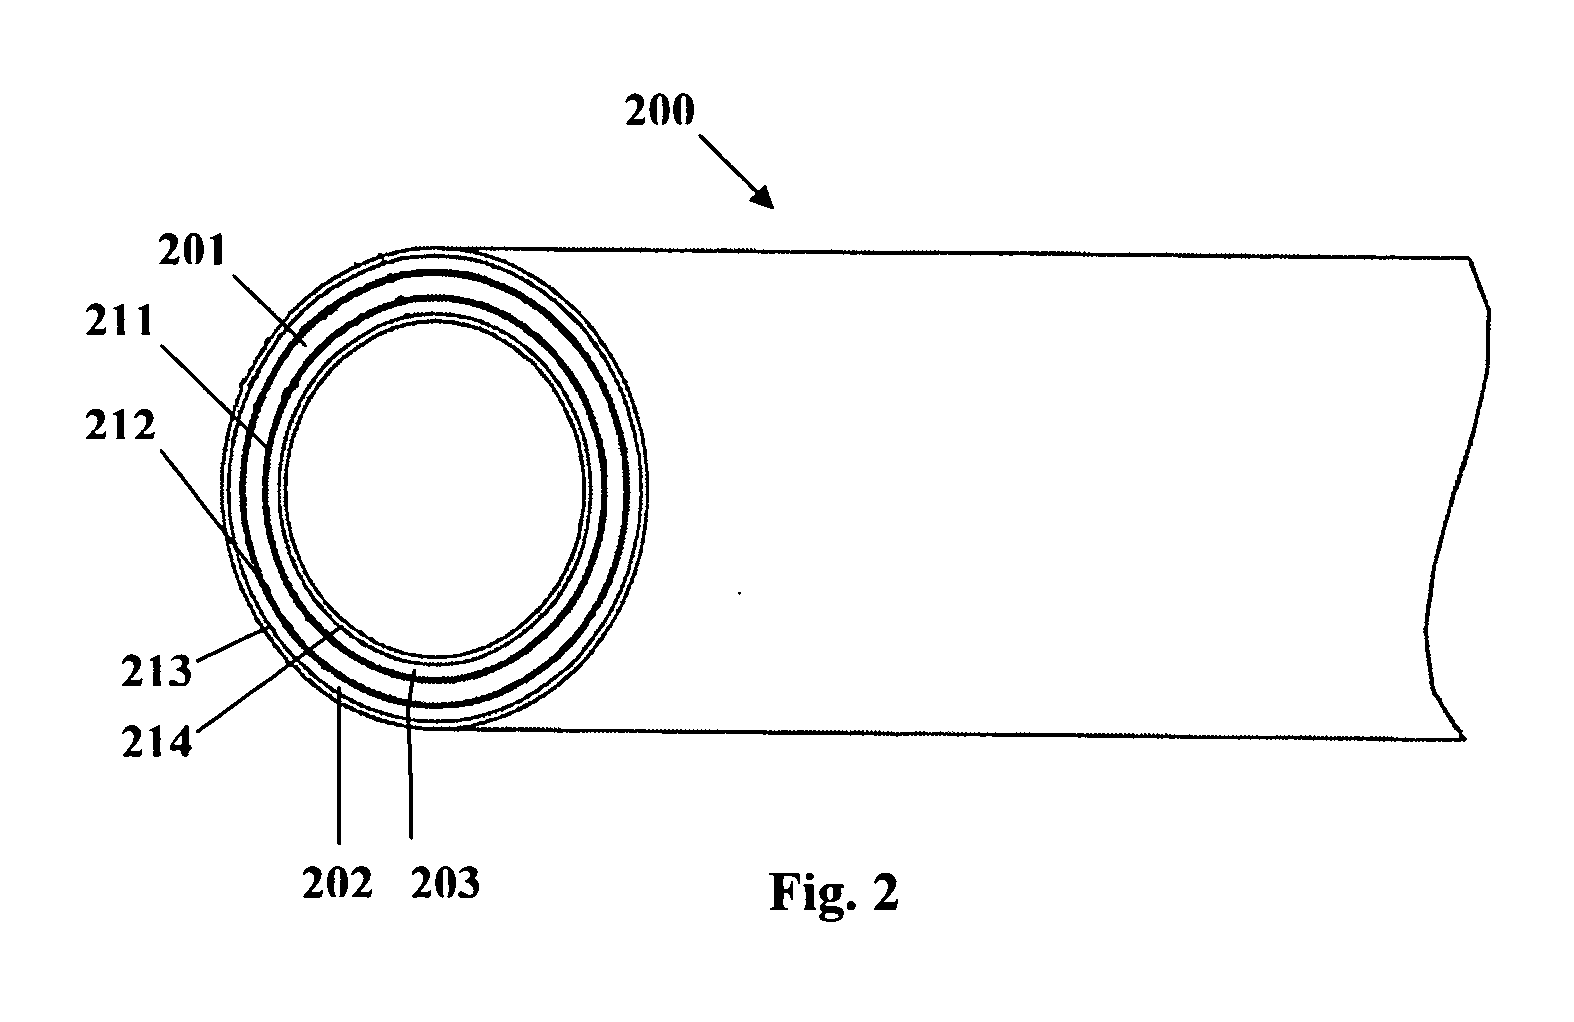 Implantable or insertable medical device resistant to microbial growth and biofilm formation